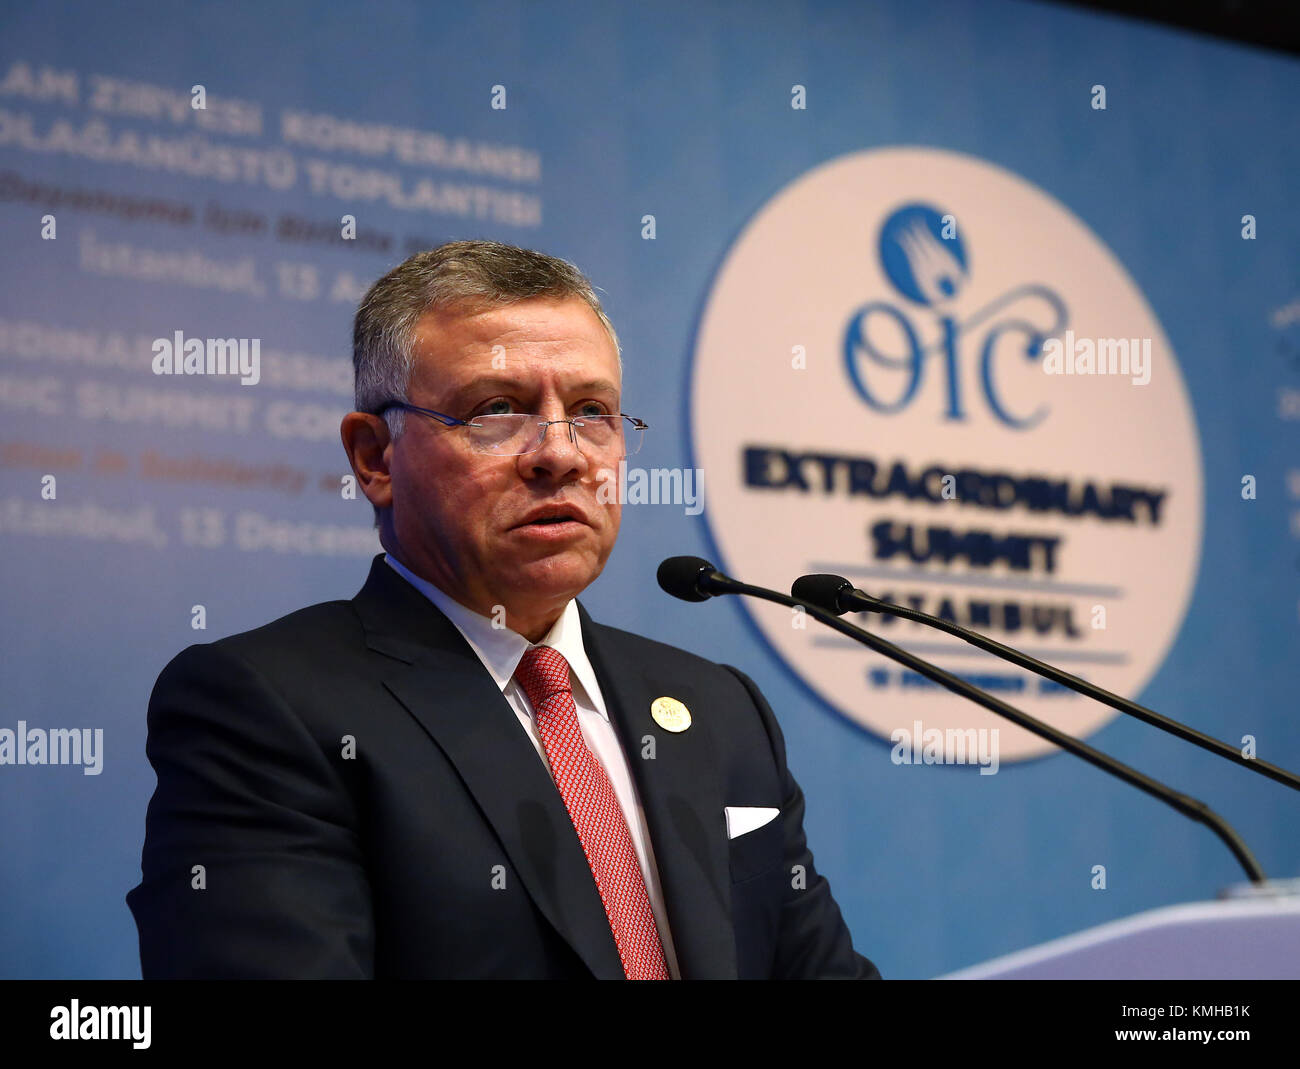 Istanbul, Turkey. 13th Dec, 2017. Jordanian monarch King Abdullah II delivers a speech during the extraordinary summit of the Organization of Islamic Cooperation (OIC) in Istanbul, Turkey, on Dec. 13, 2017. Turkish President Recep Tayyip Erdogan on Wednesday urged the Islamic world to recognize Jerusalem as the capital of Palestine, while Palestinian President Mahmoud Abbas refused any U.S. involvement in the peace process. Credit: Anadolu Agency/Xinhua/Alamy Live News Stock Photo